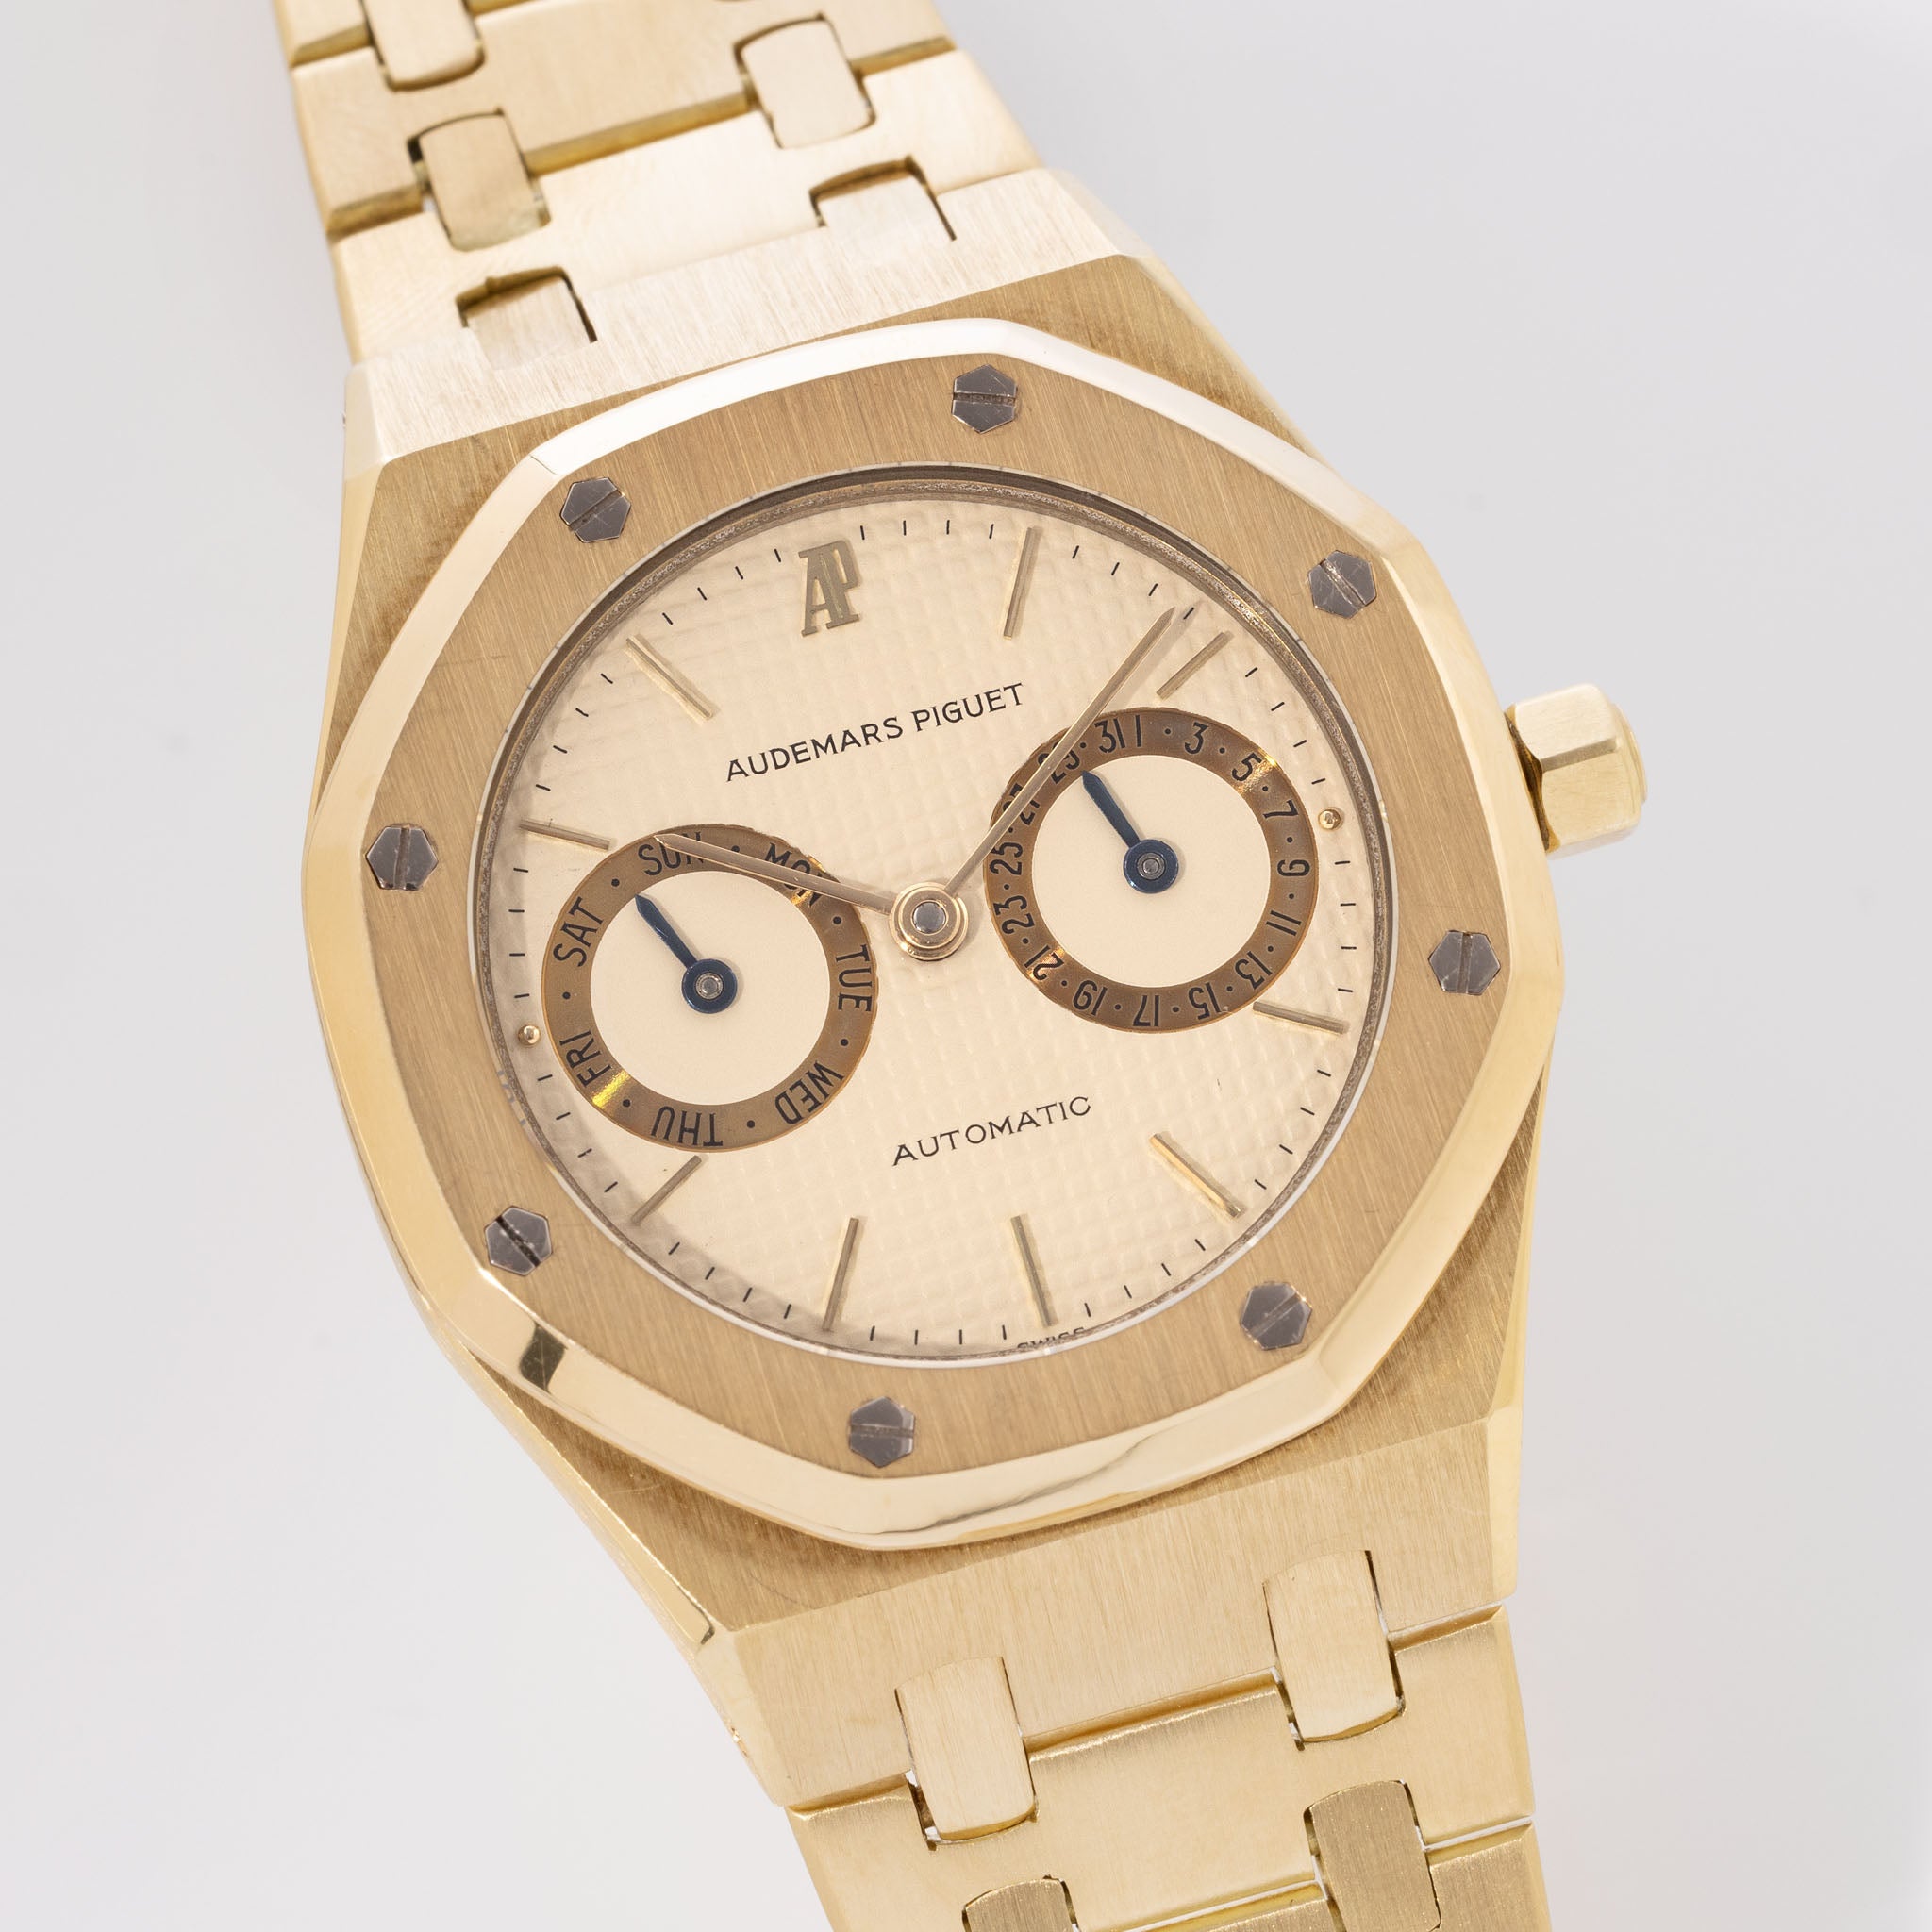 Audemars Piguet Royal Oak 5572BA Day-Date 18kt Yellow Gold "Owl" With Archive Extract